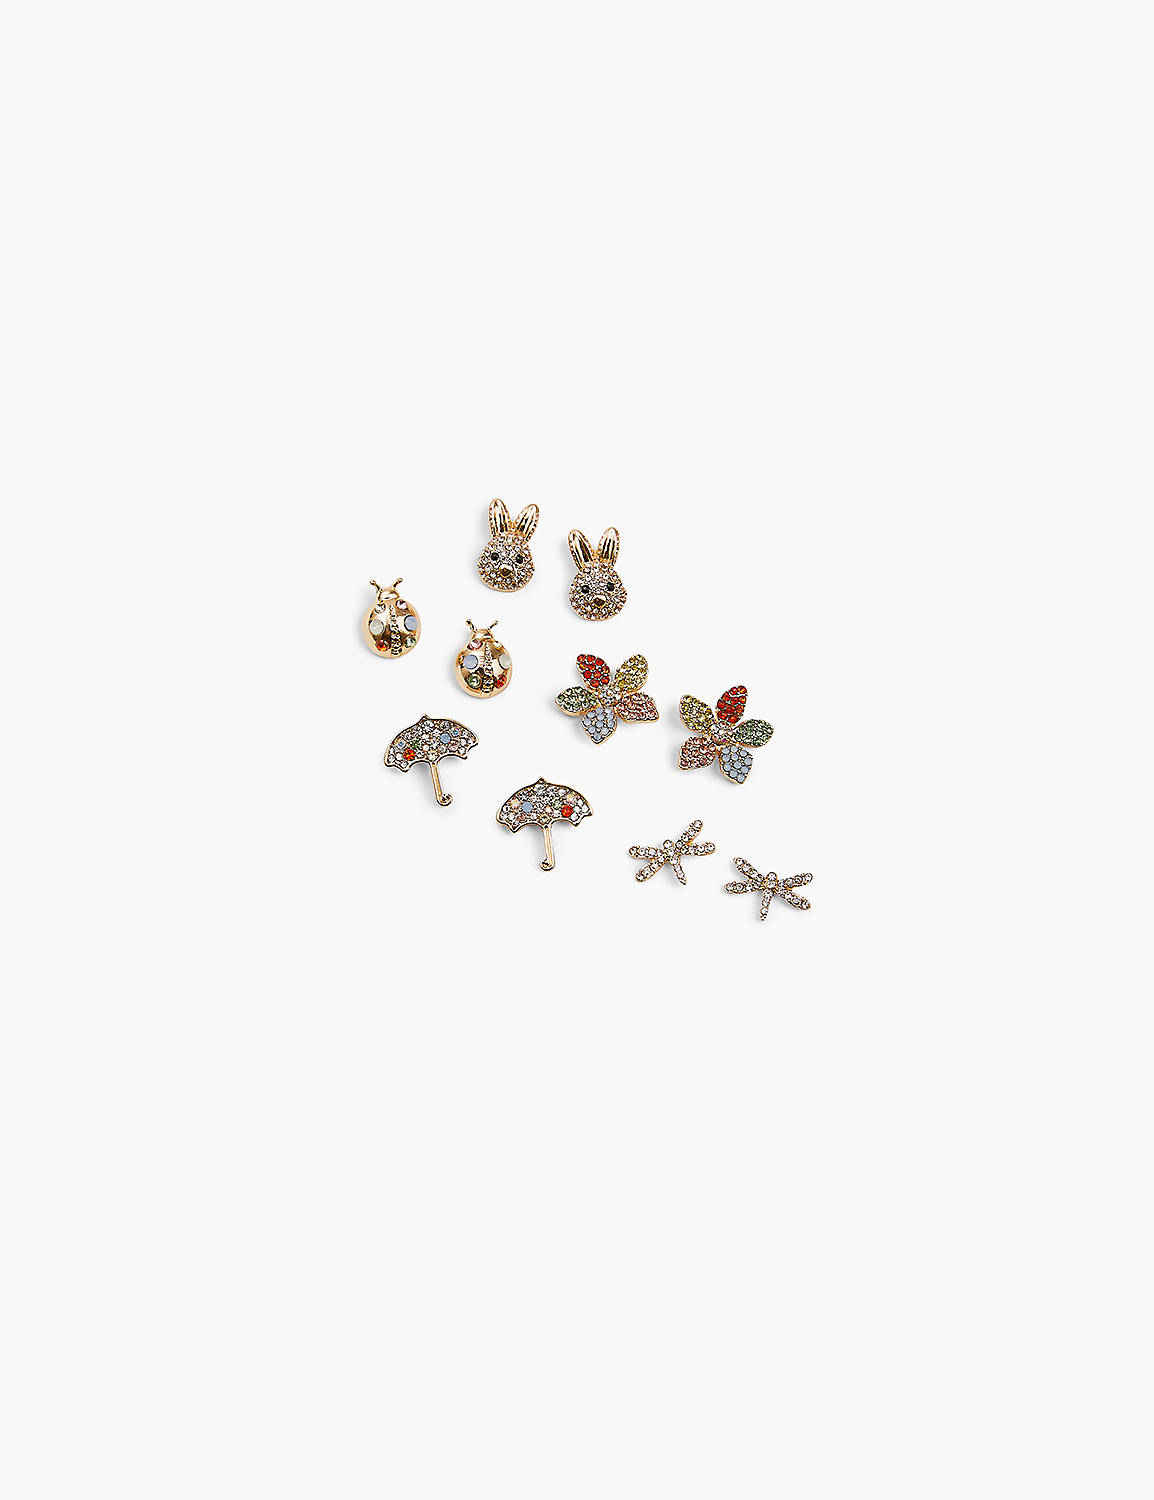 Spring Icon Earrings - 4 Pack Product Image 1